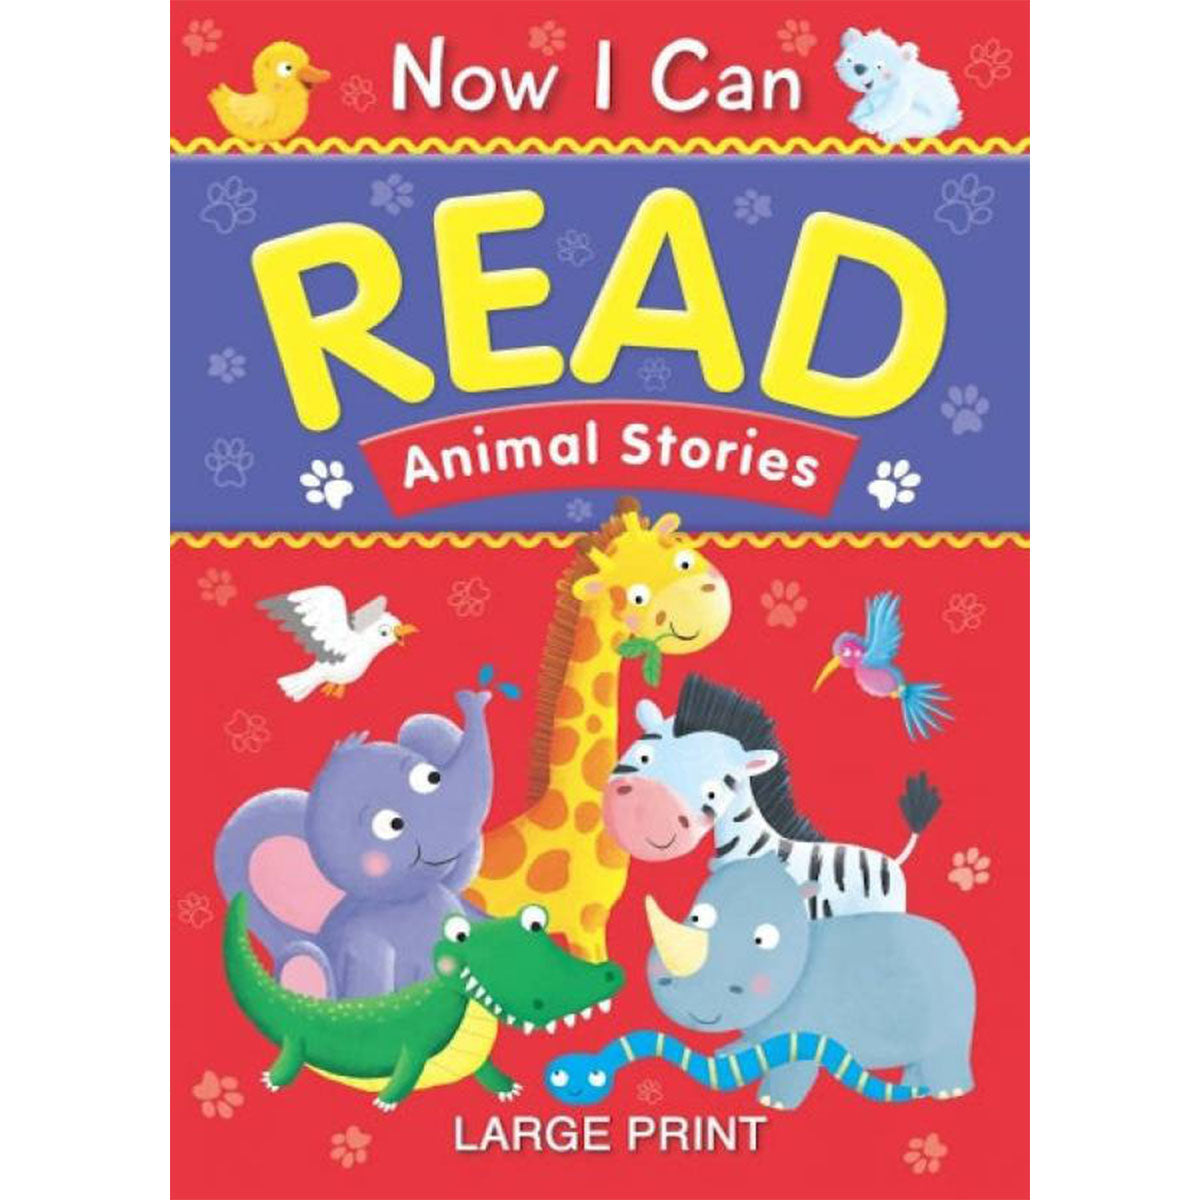 Animal Stories Now I Can Read - Large Print